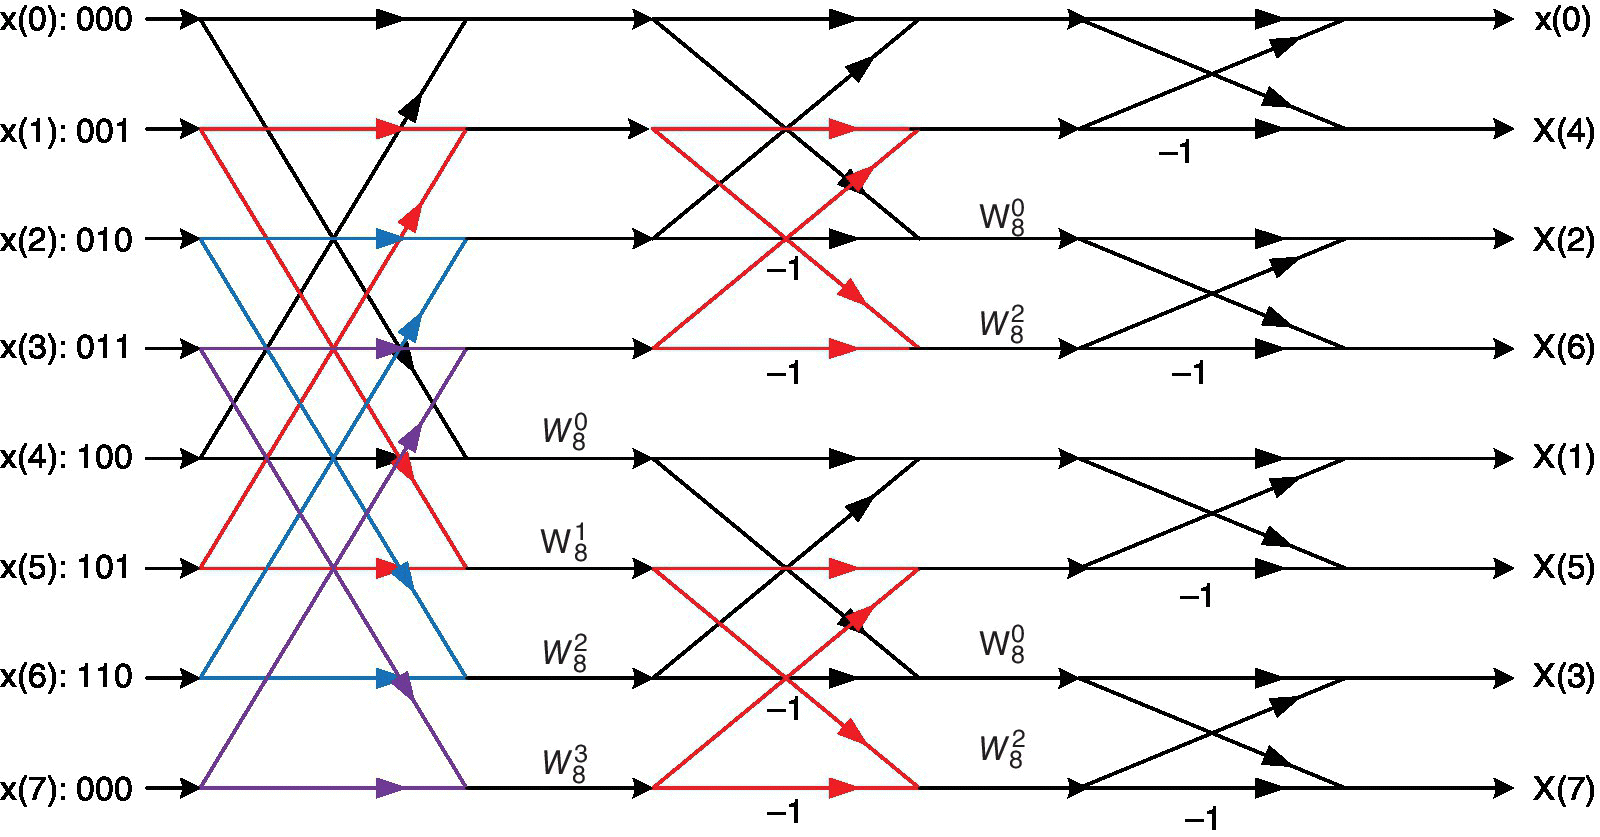 Schematic with crisscrossed arrows illustrating the decimation in frequency (DIF) Radix 2 FFT with labels W80, W82, W83, etc.